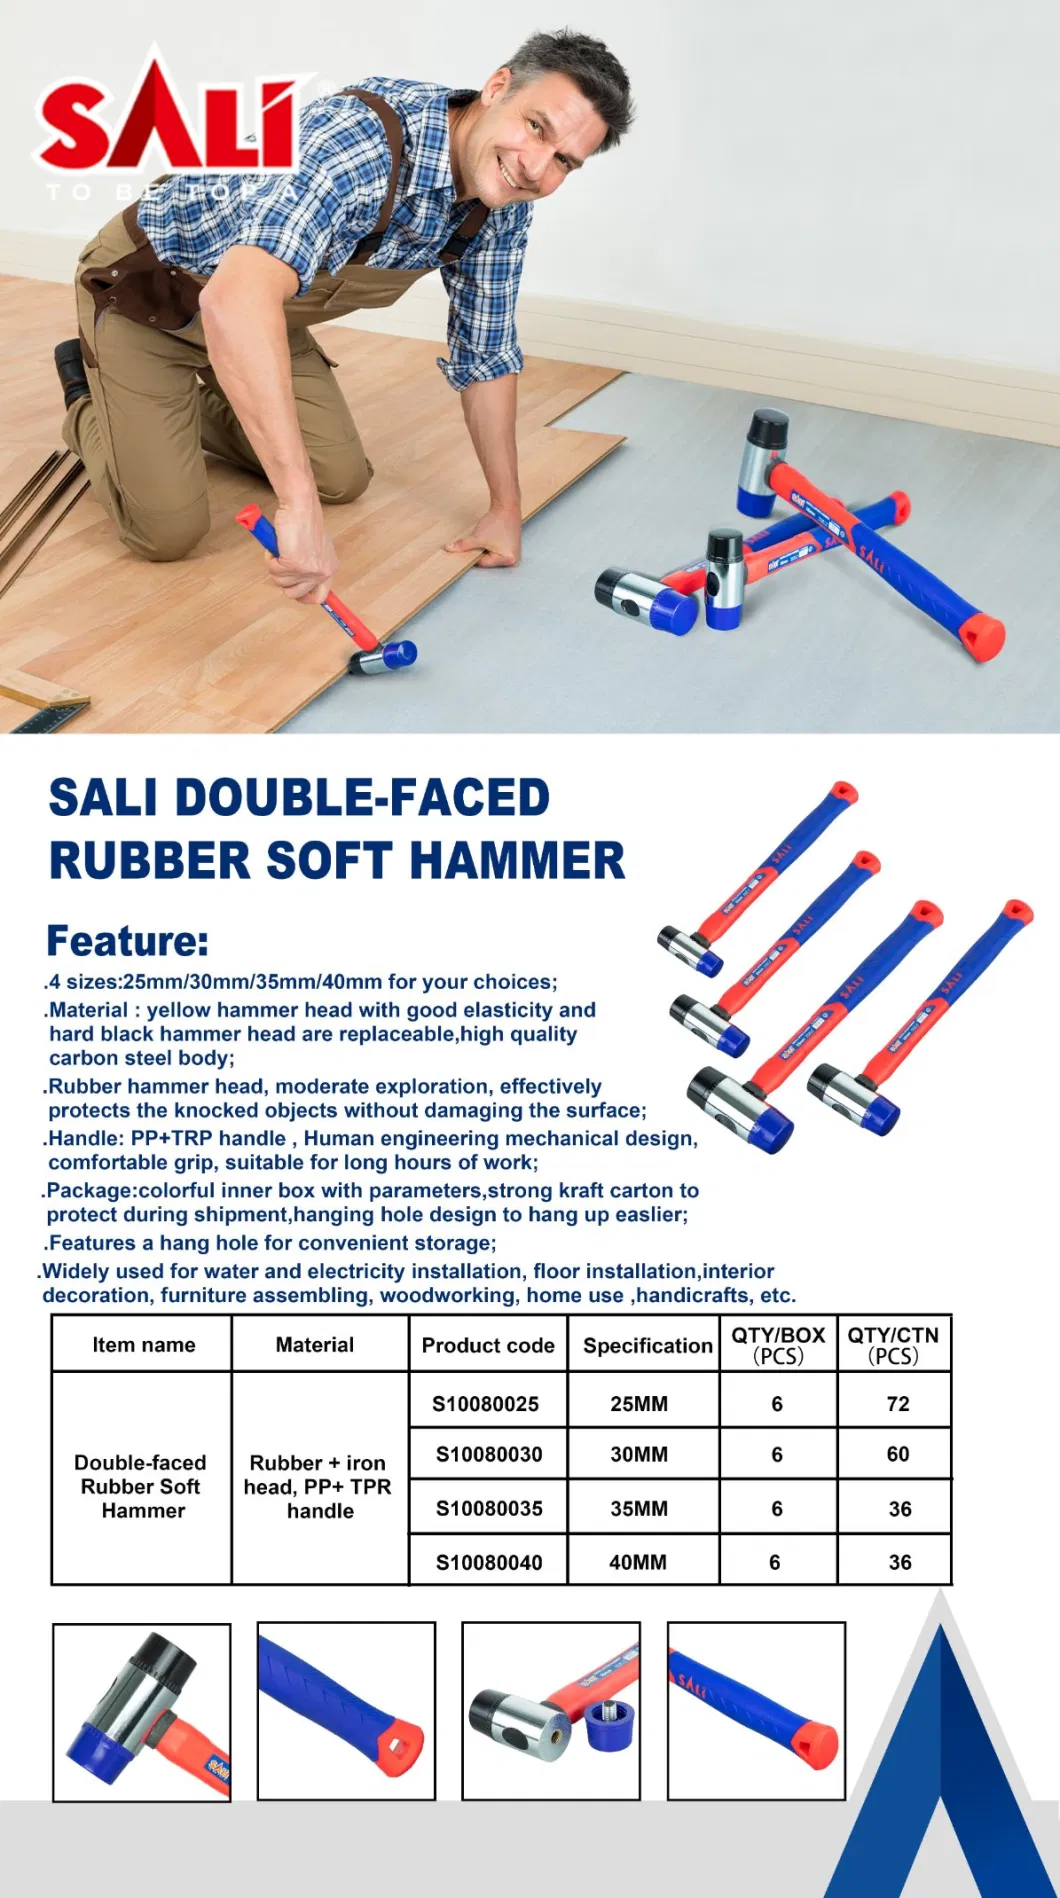 Sali S10080040 40mm Iron Head Double-Faced Rubber Soft Hammer